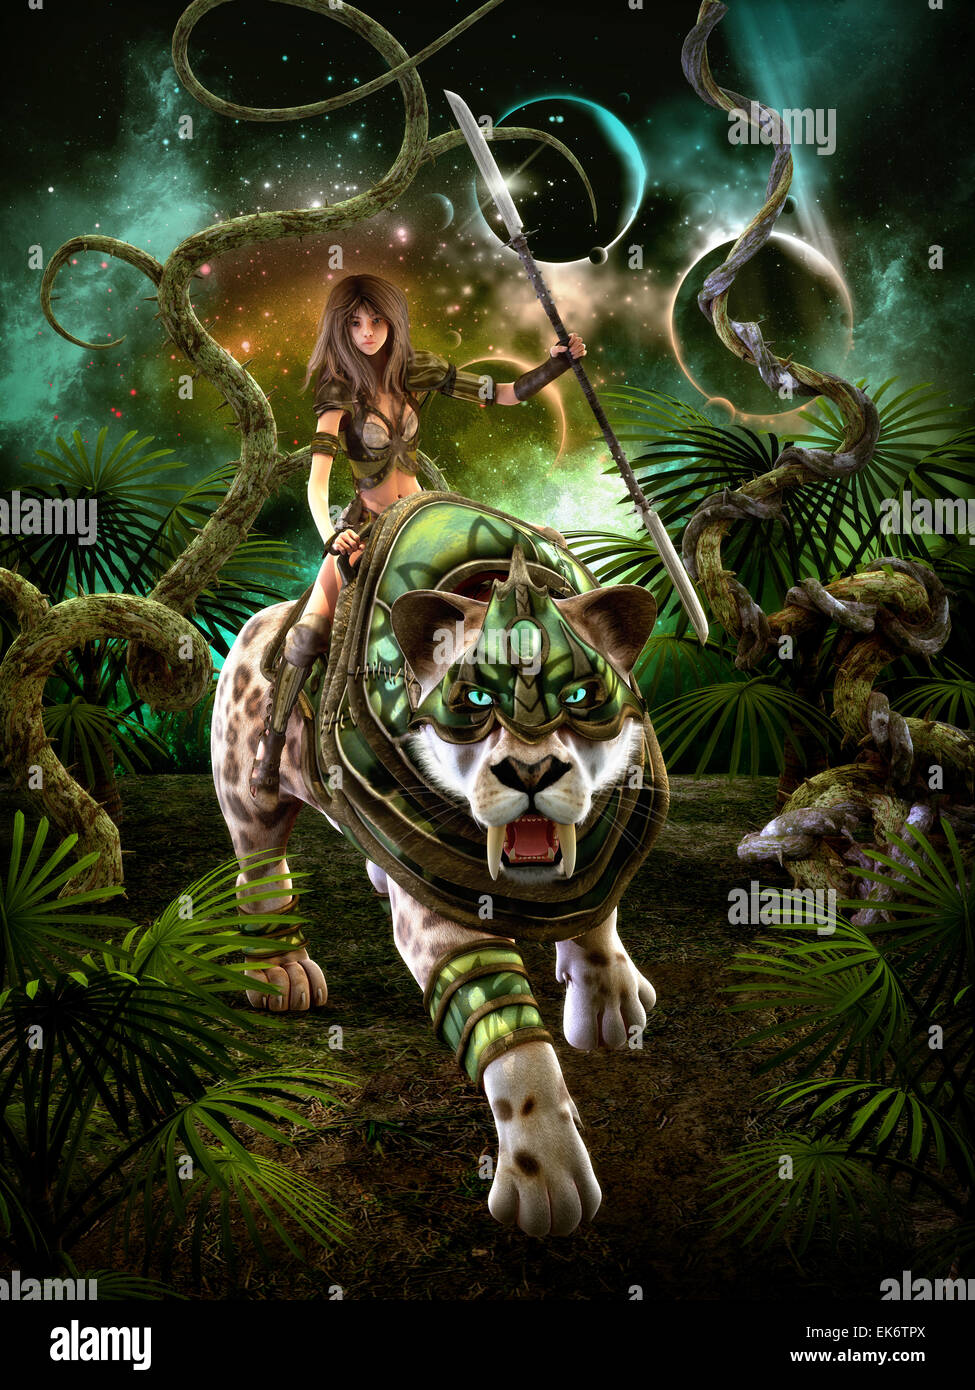 3d computer graphics of a fantasy scene with girl and saber-tooth tiger Stock Photo